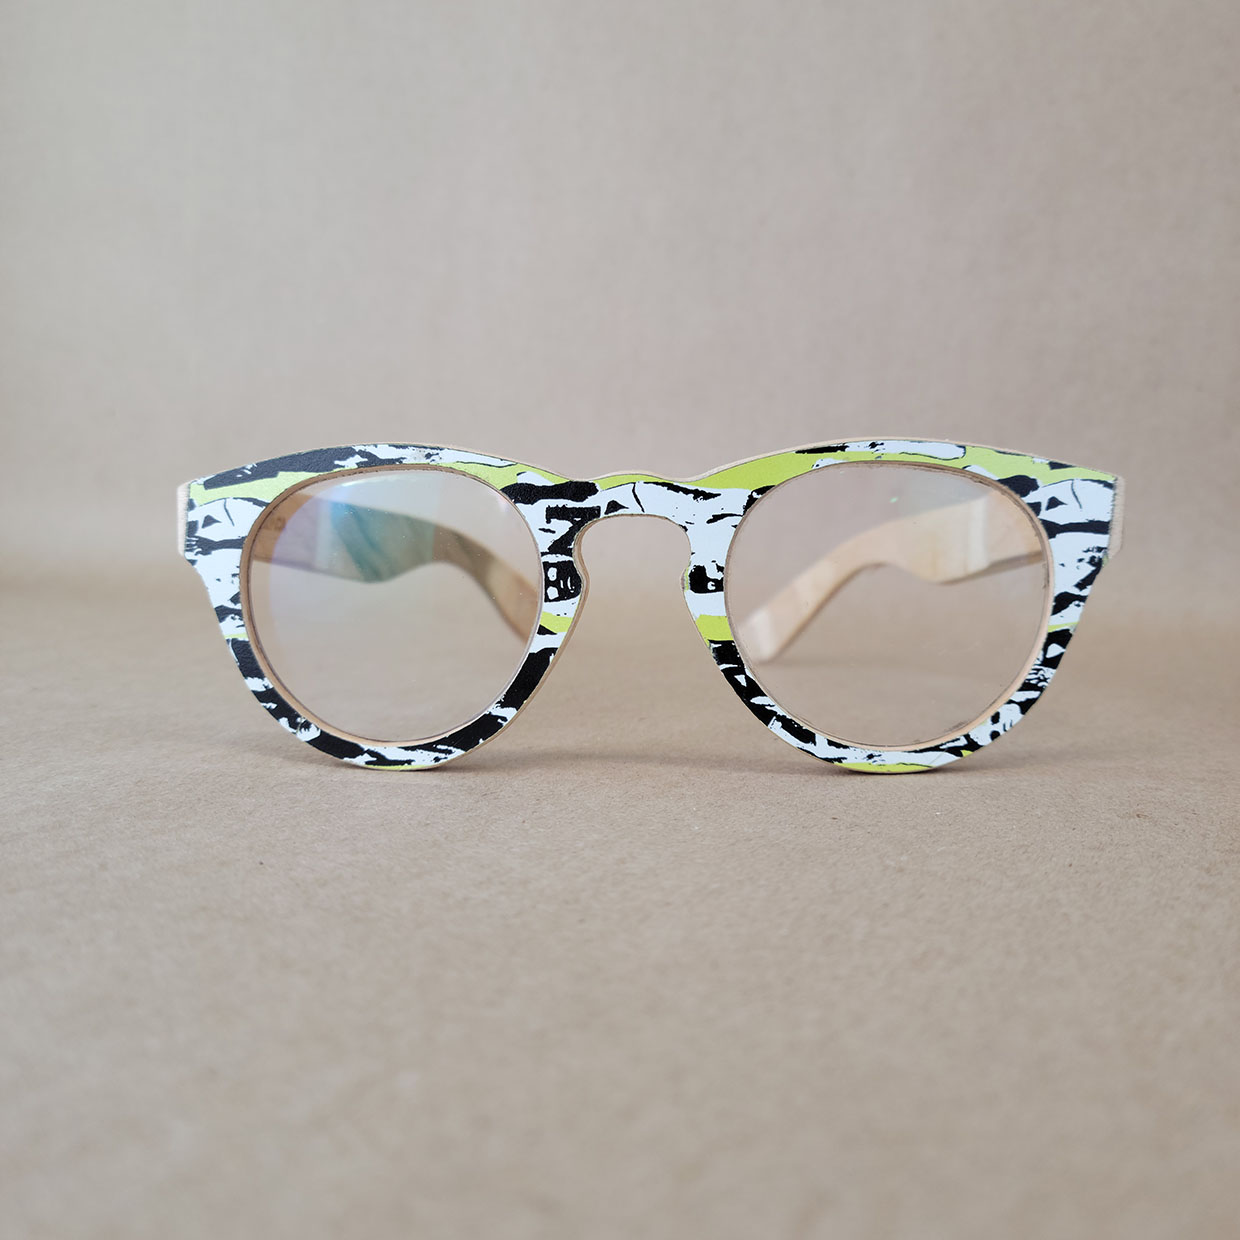 Recycled Skateboard Reading Glasses (Rounded style)